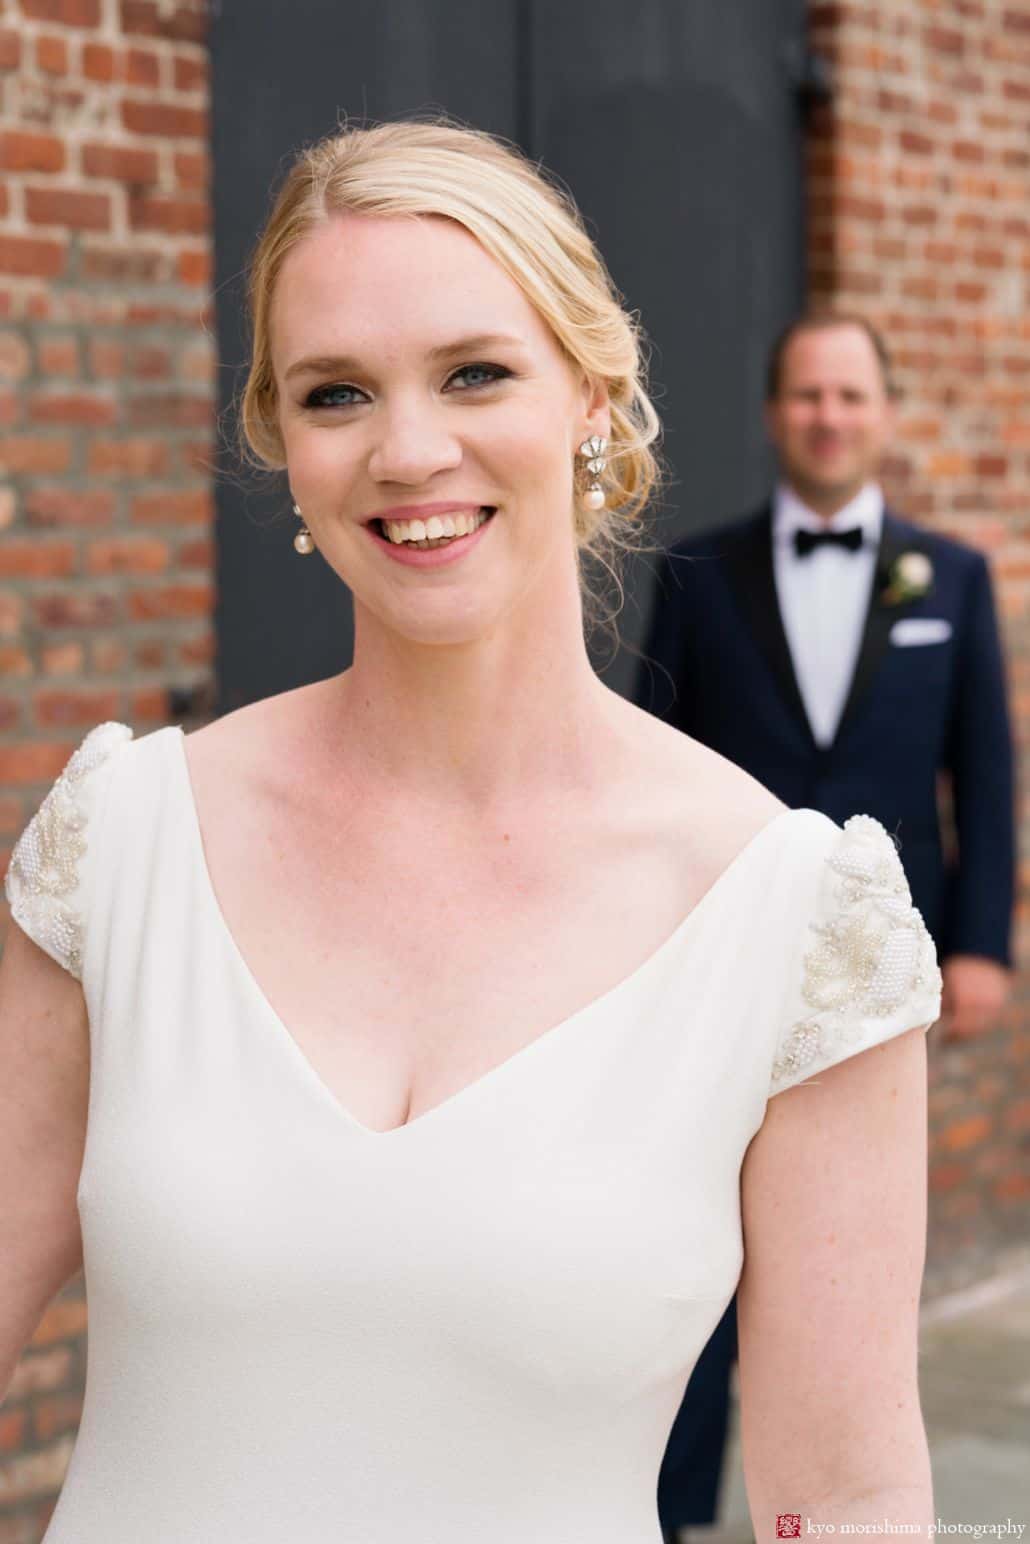 Wedding poses ideas: bride in foreground with groom behind her, shallow depth of field (photo taken in Red Hook Brooklyn)